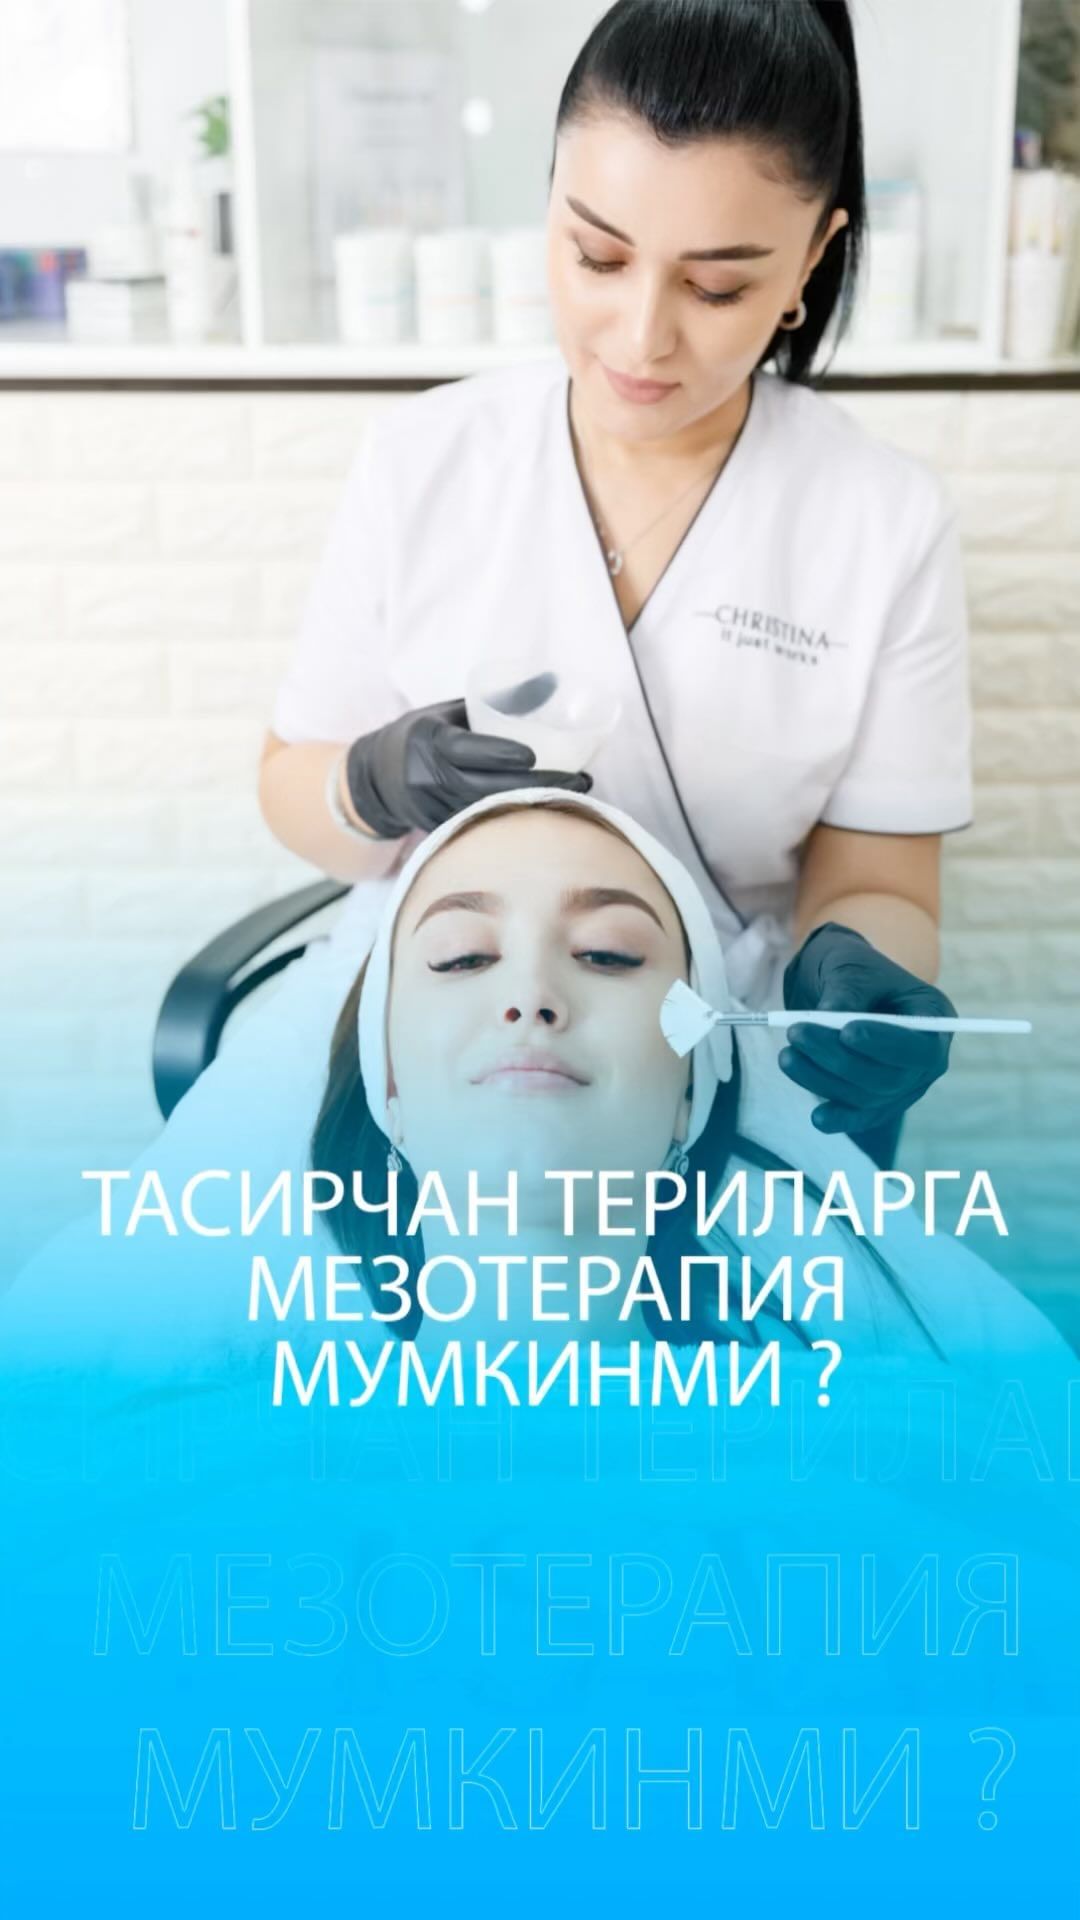 One of the top publications of @cosmetolog_nadira_yakubova which has 33 likes and 5 comments